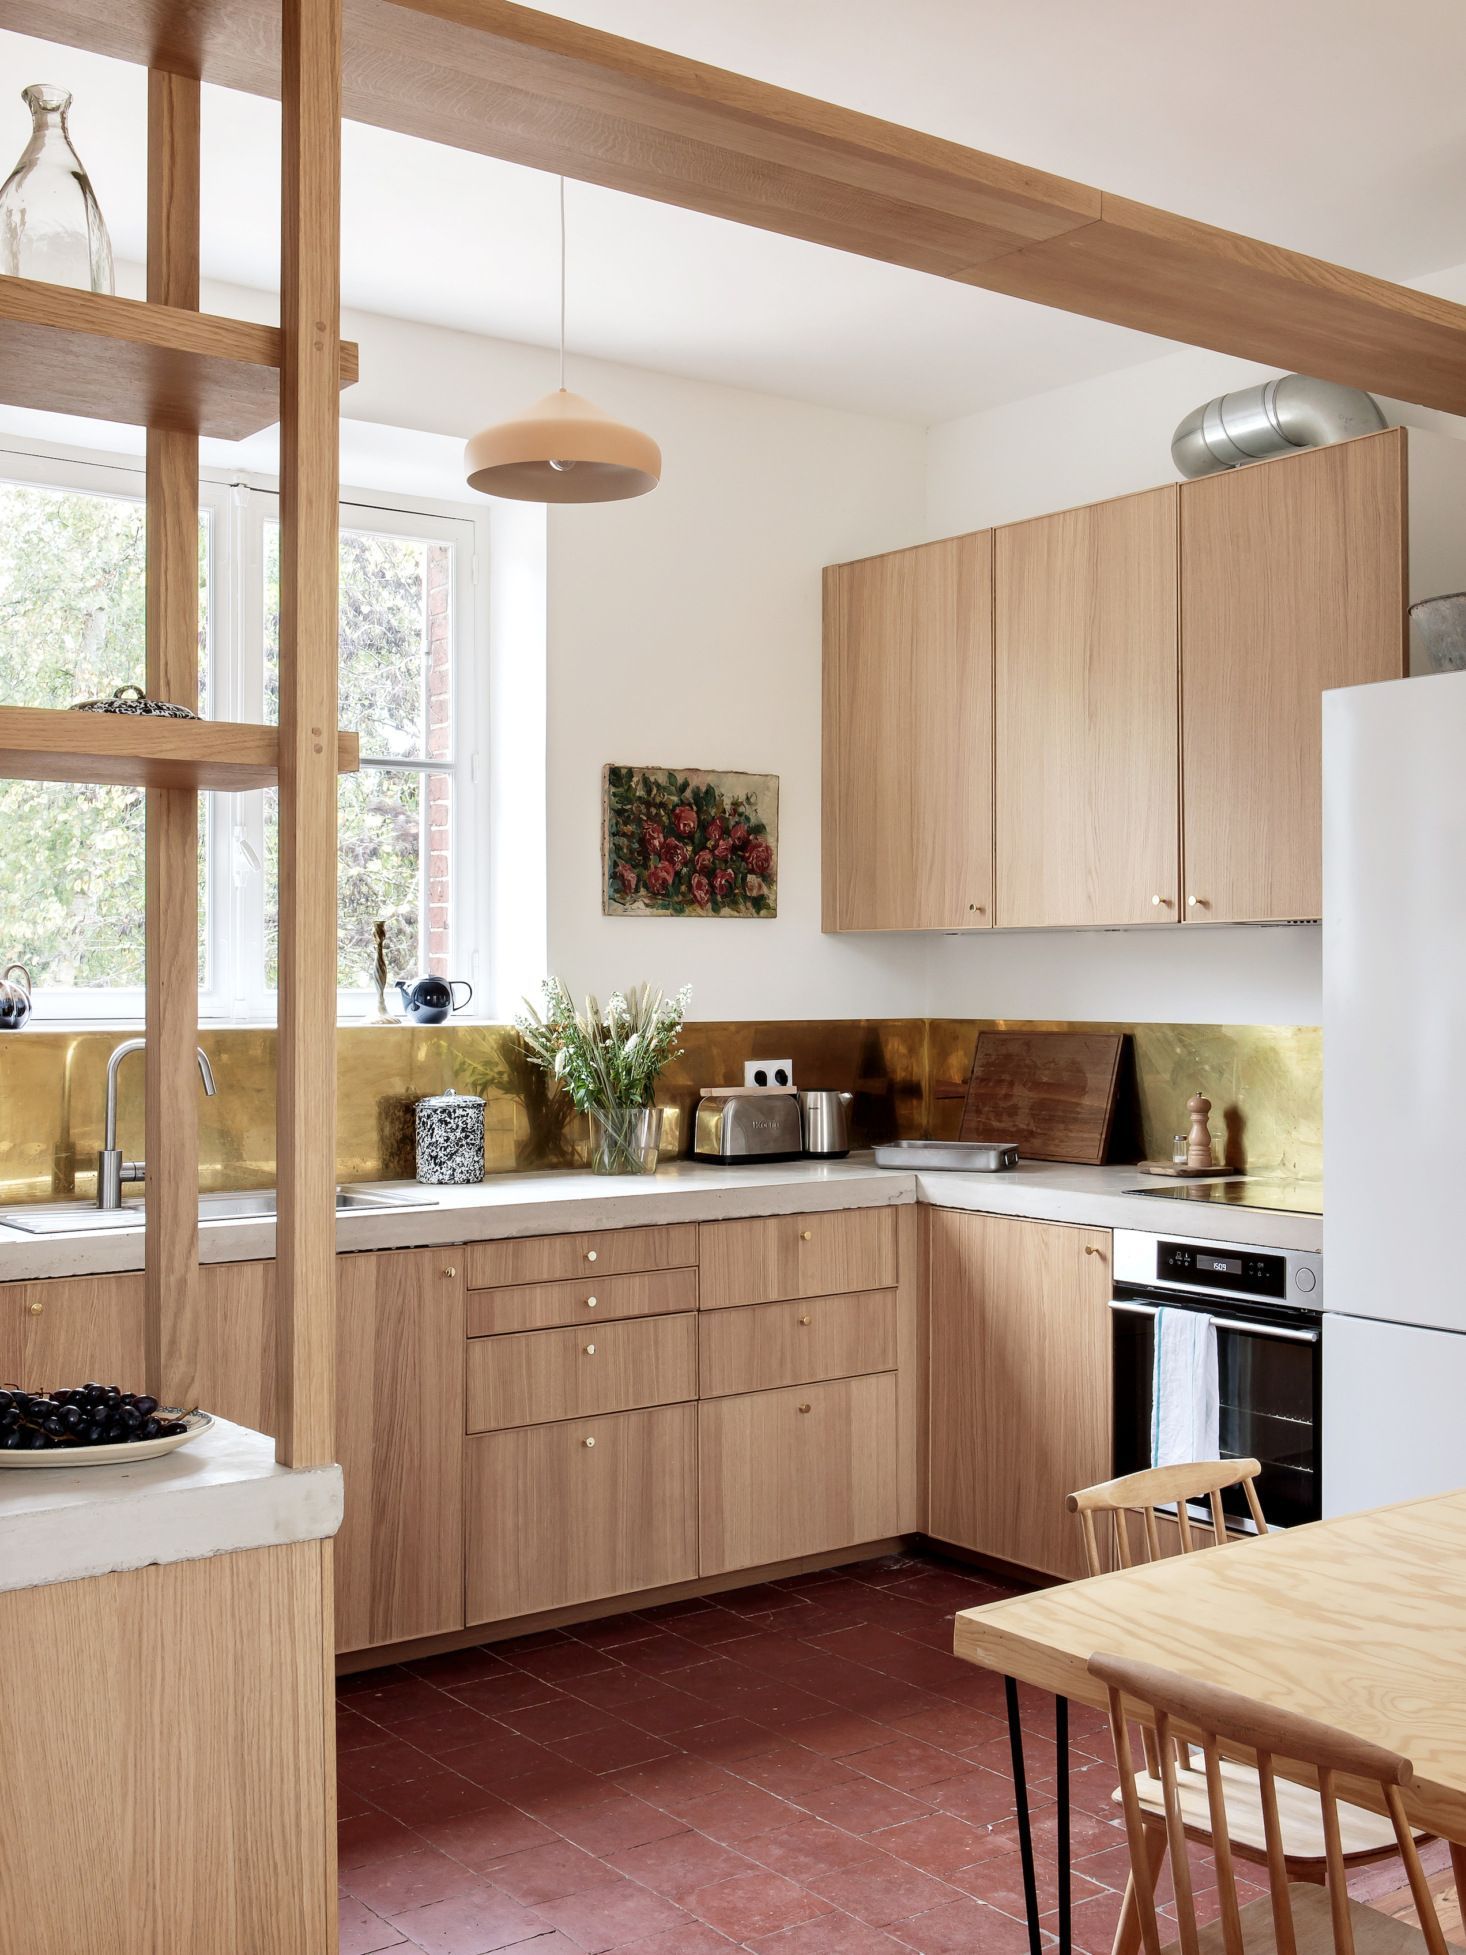 IKEA Kitchen Ideas   The Most Beautiful Kitchens Made from IKEA ...